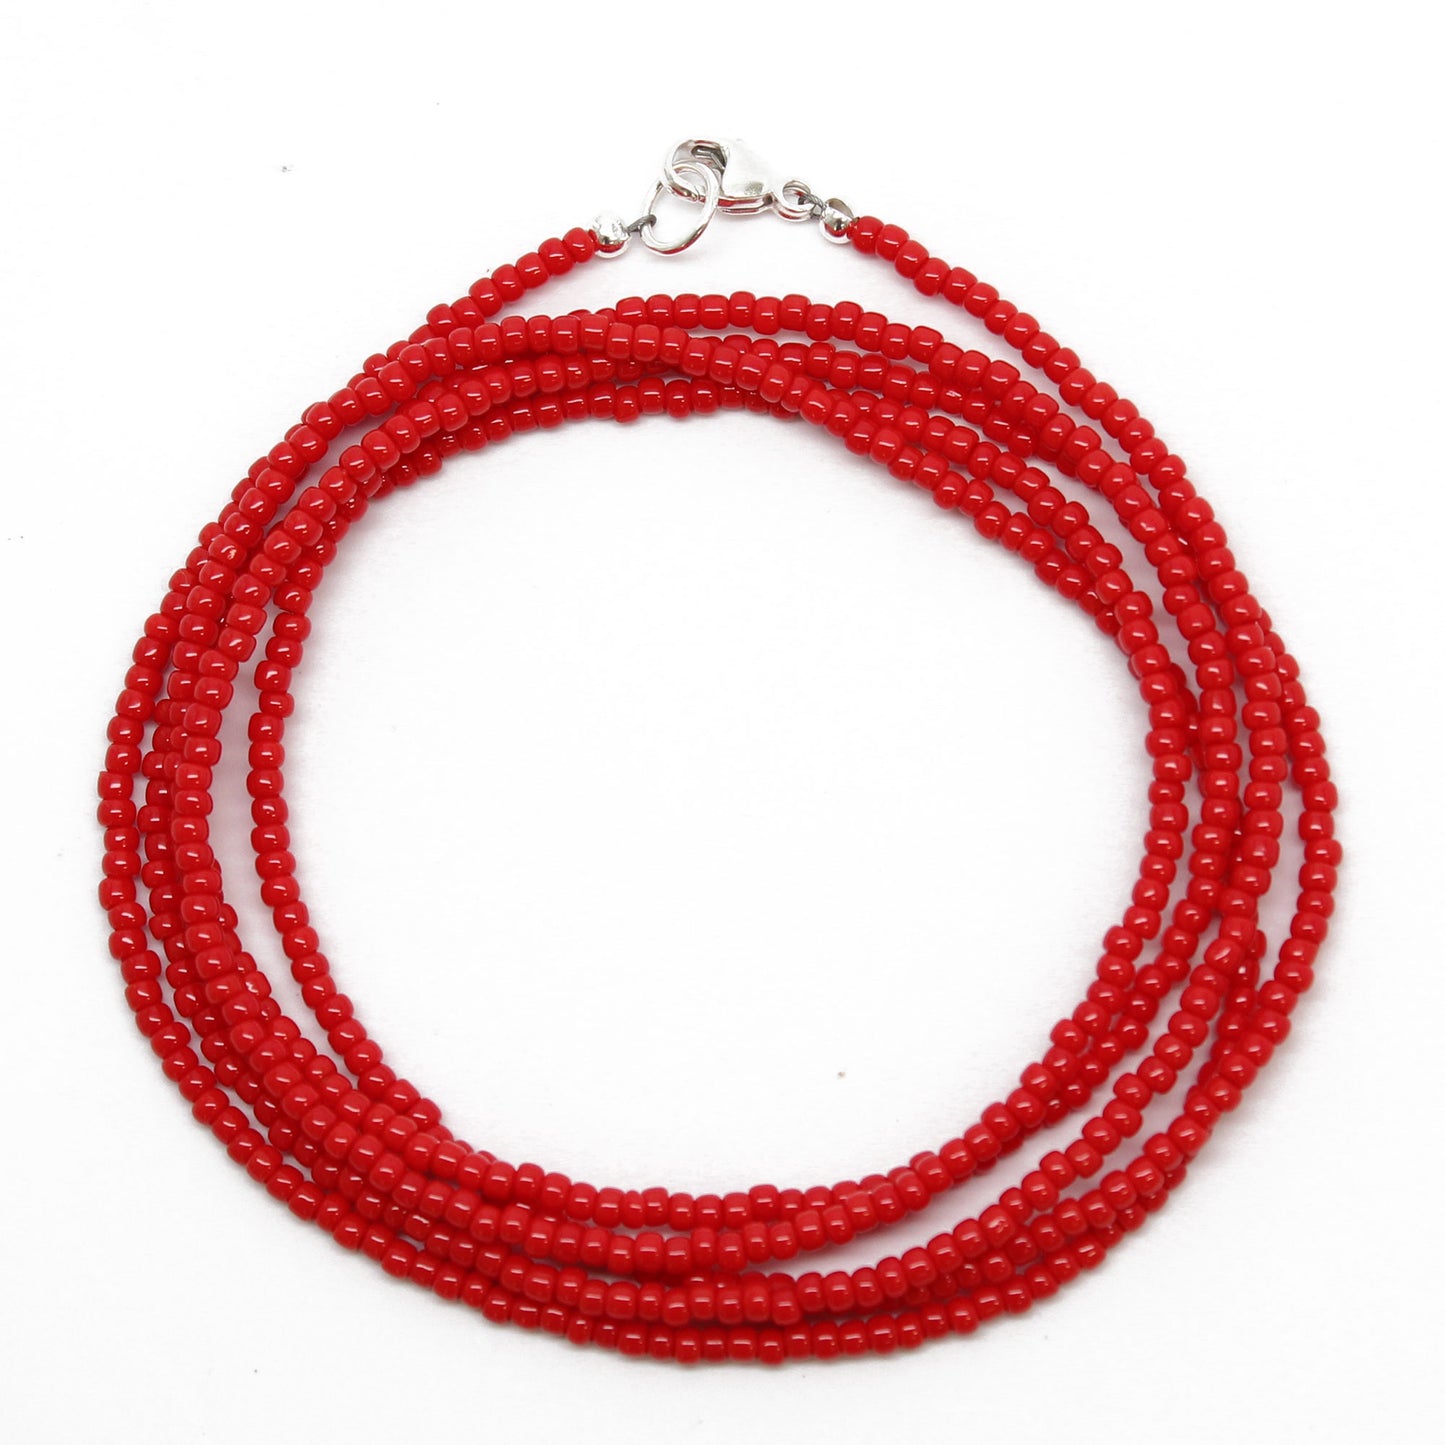 Red Beads & Products - The Bead Shop